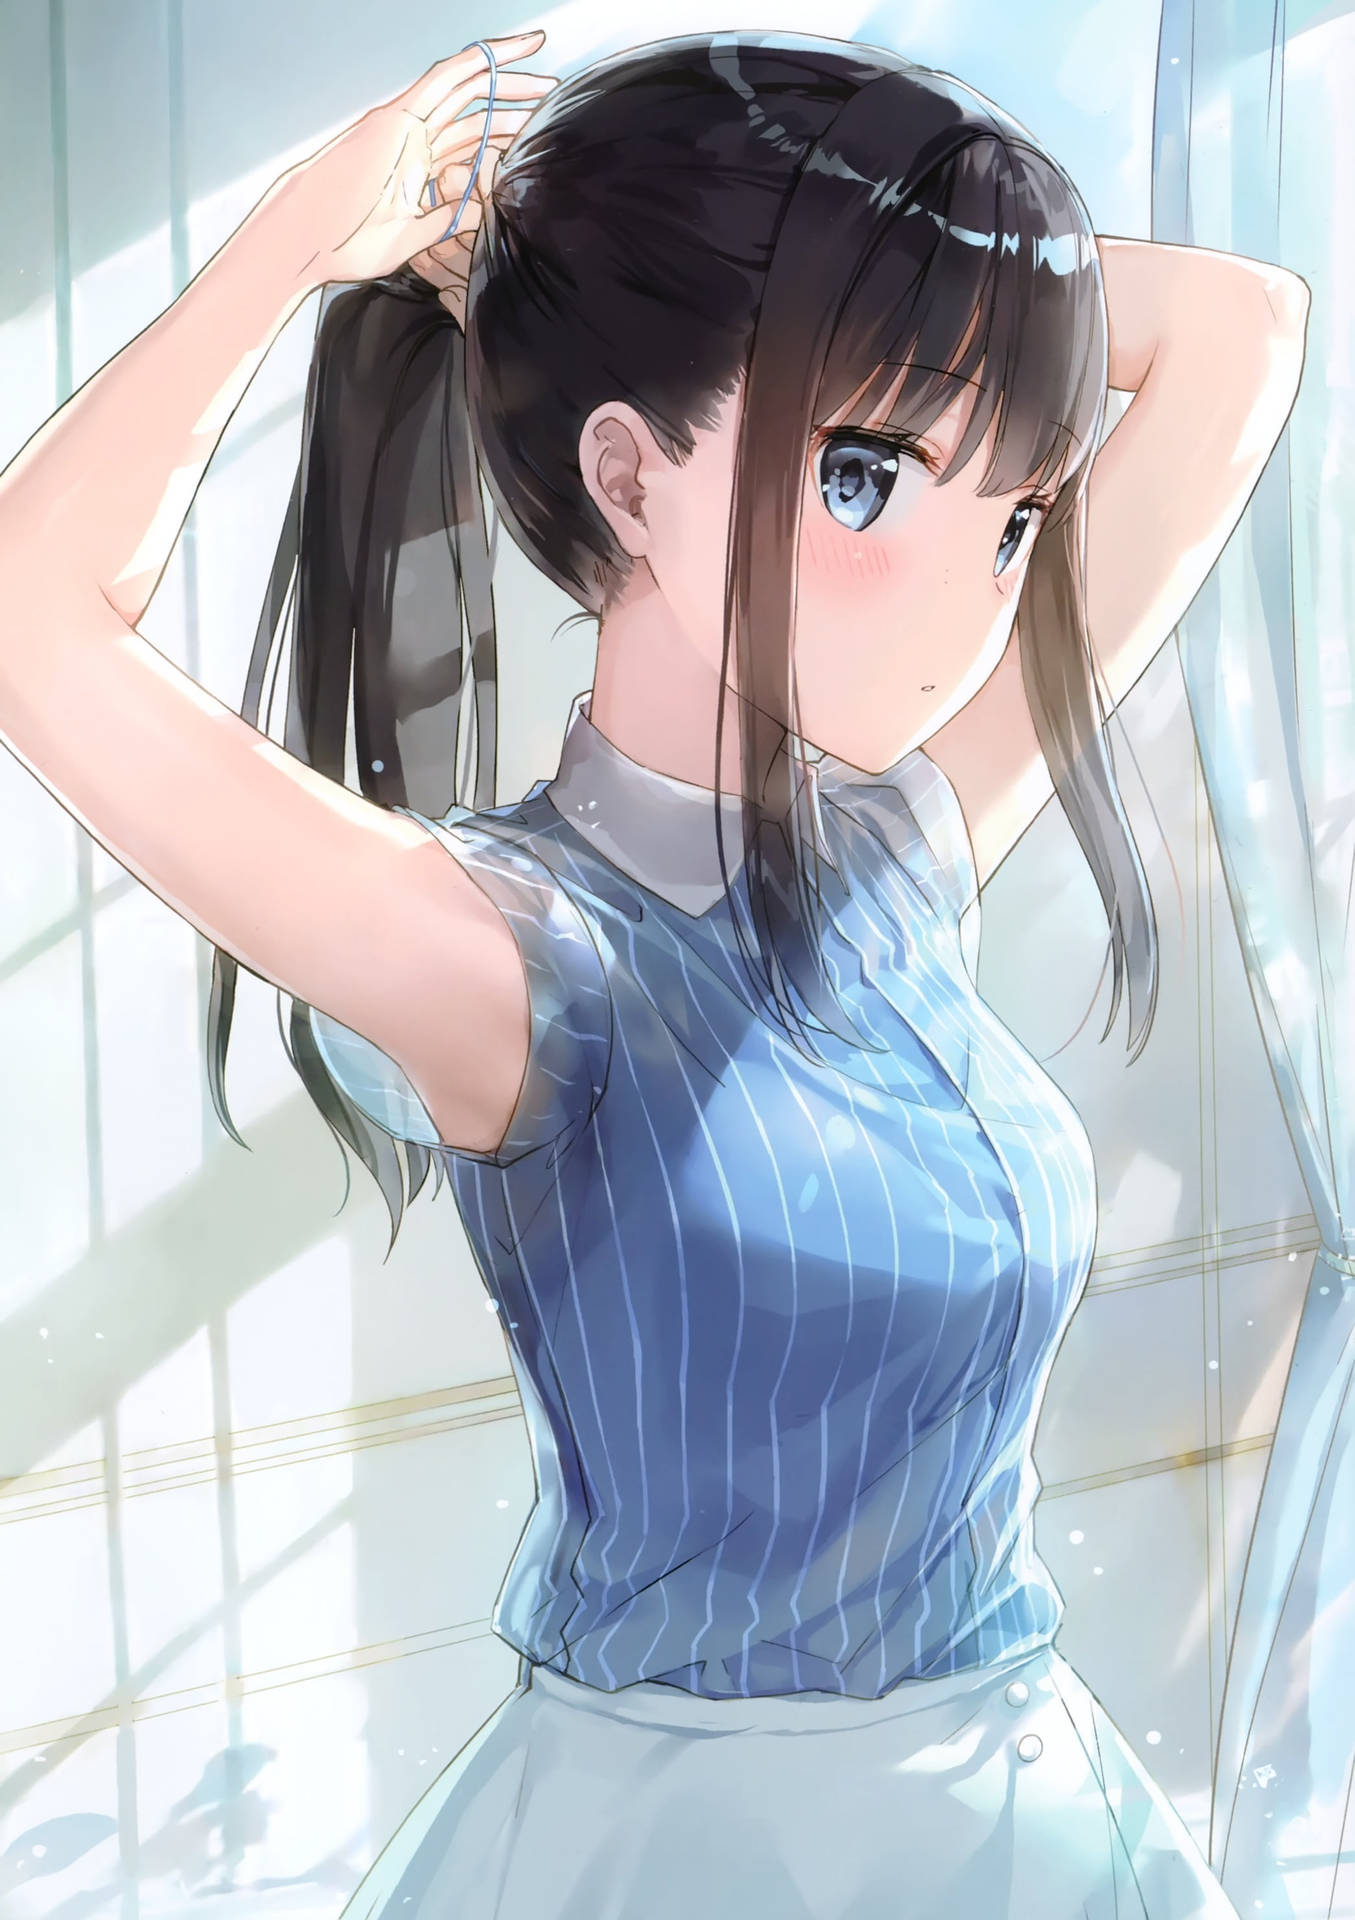 Download Cute Kawaii Anime Girl With Ponytail Wallpaper | Wallpapers.com-demhanvico.com.vn